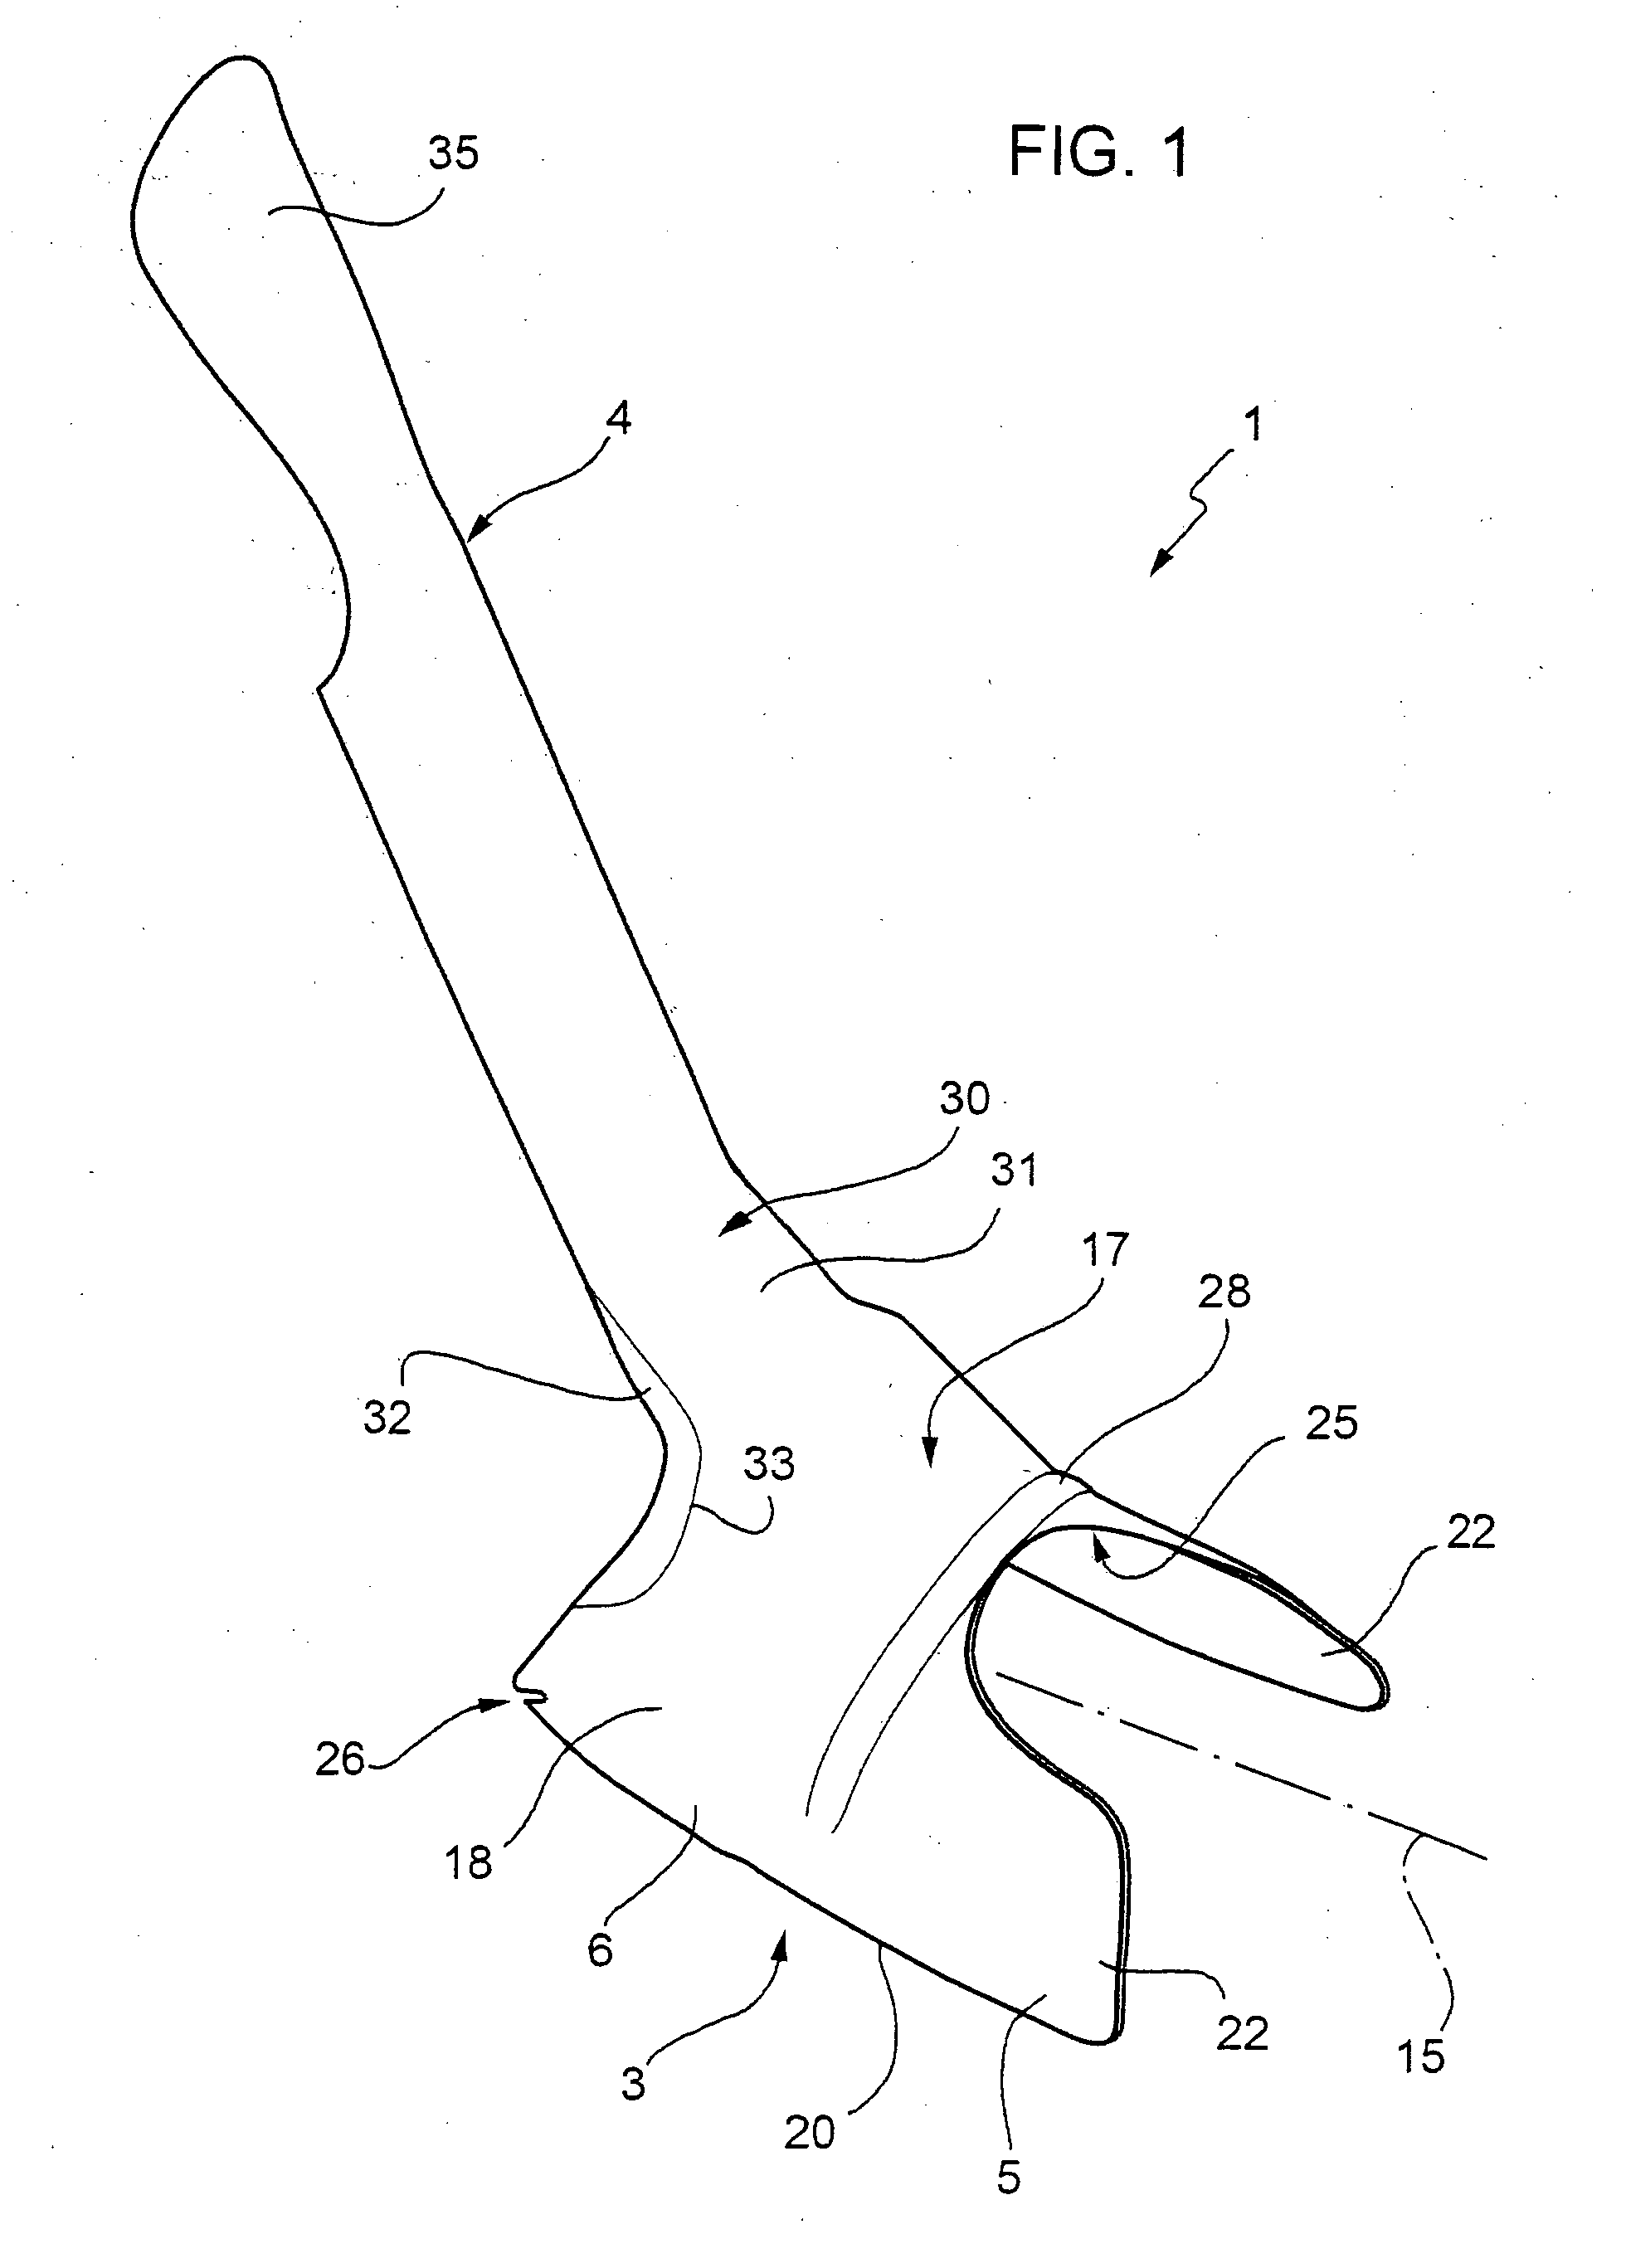 Hosiery donning device, in particular for compression hosiery